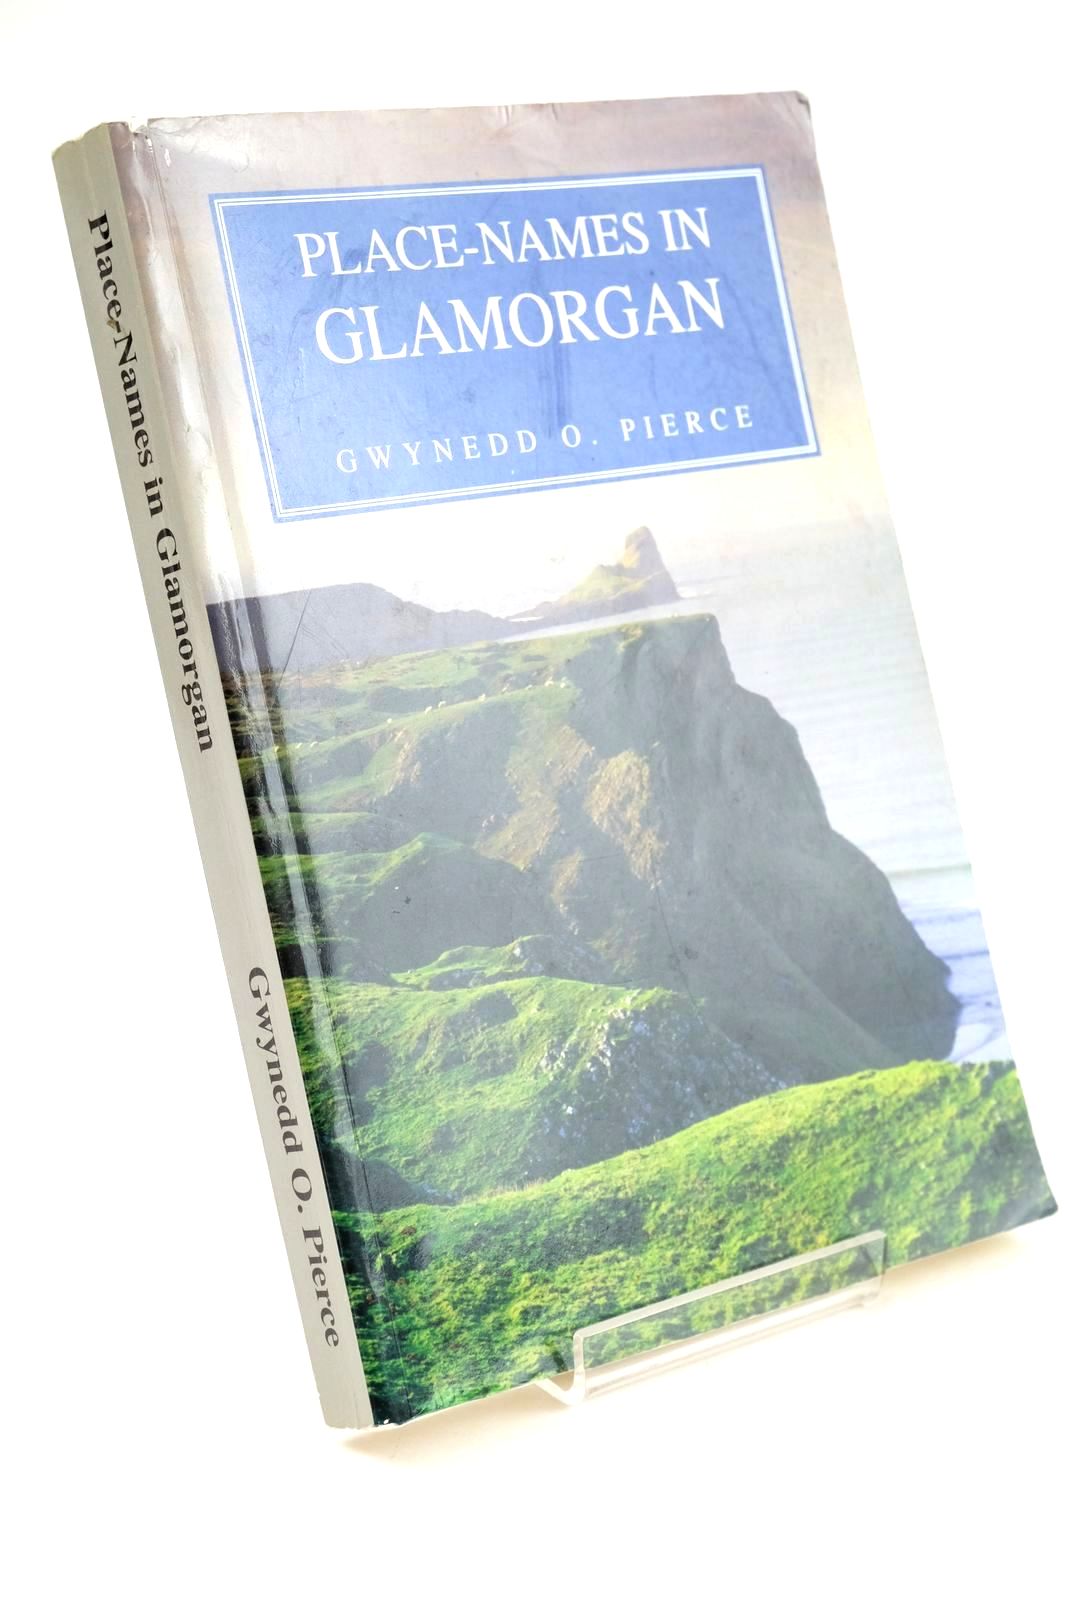 Photo of PLACE-NAMES IN GLAMORGAN written by Pierce, Gwynedd O. published by Merton Priory Press (STOCK CODE: 1323998)  for sale by Stella & Rose's Books